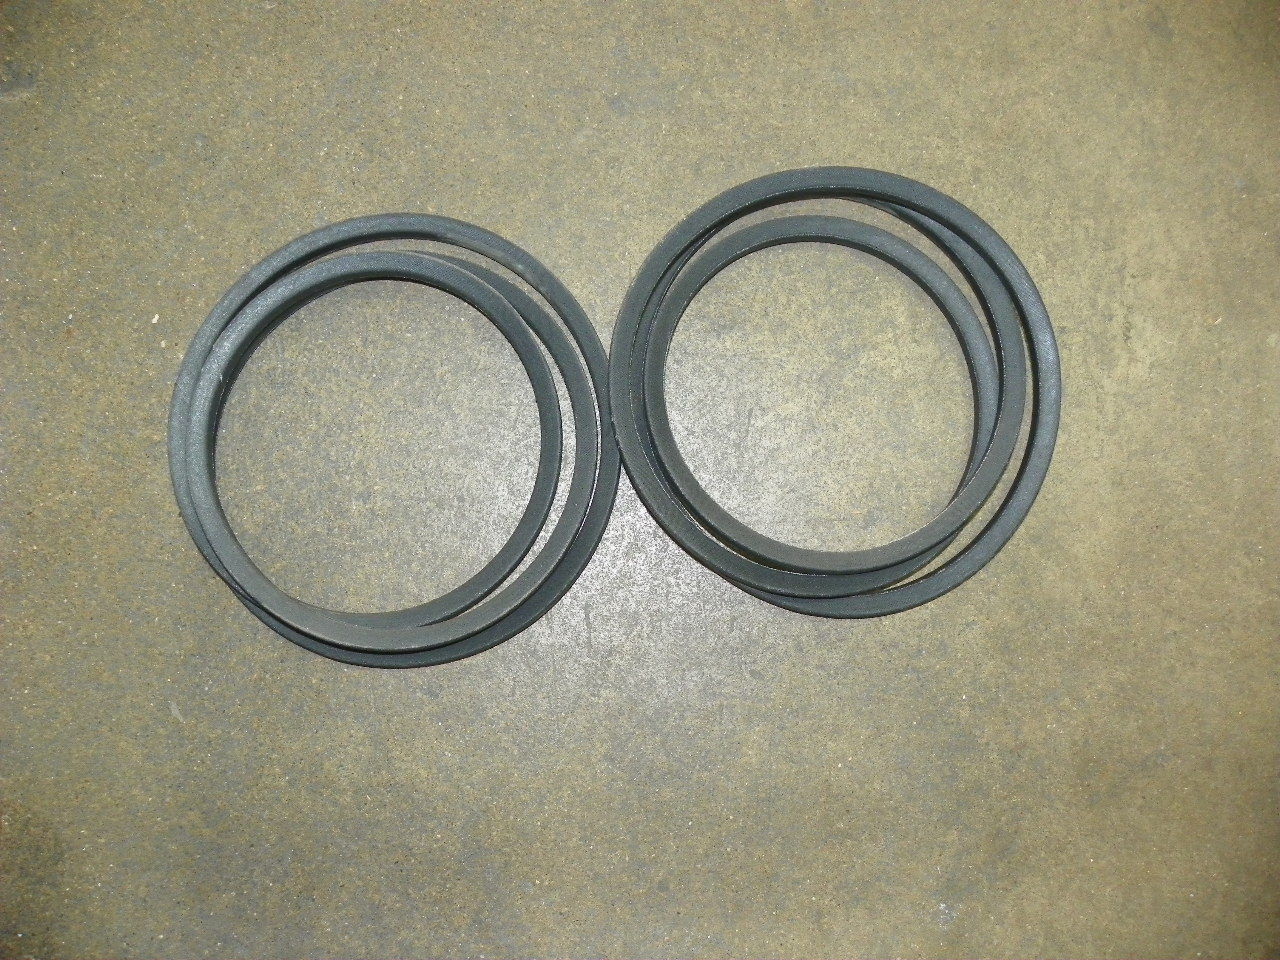 Howse/HICO CHB81 6\' C372  Finish Mower Belts. Set of 2. New, Replacement